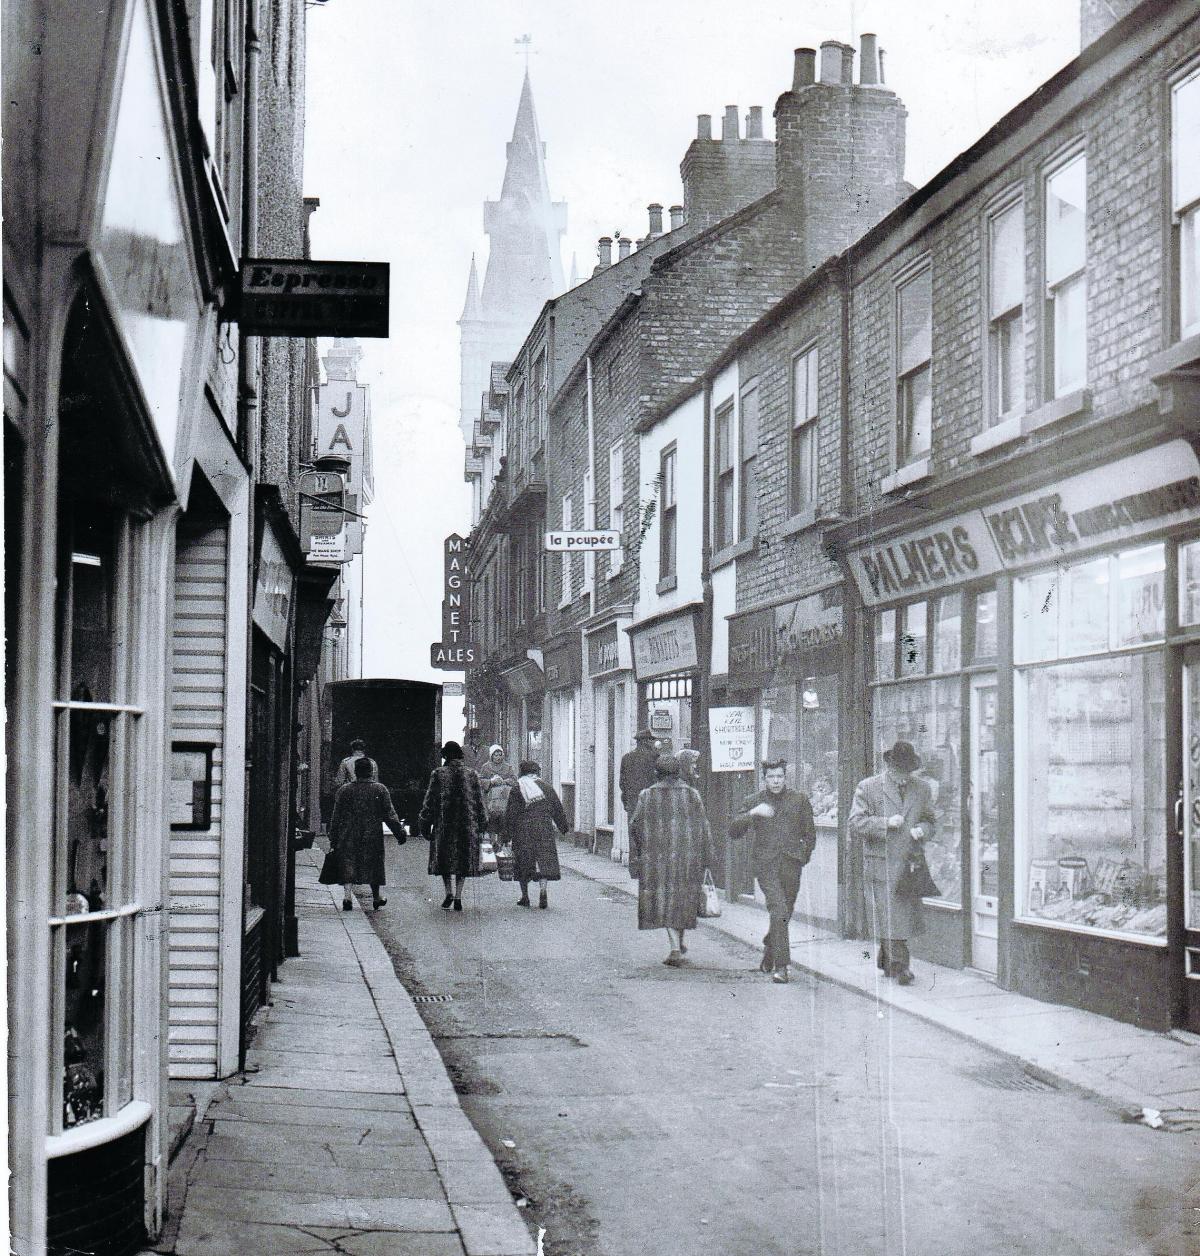 Post House Wynd in December 1962. On the left near the camera is the Espresso Coffee Bar, and in the middle on the right is a curious business called La Poupée